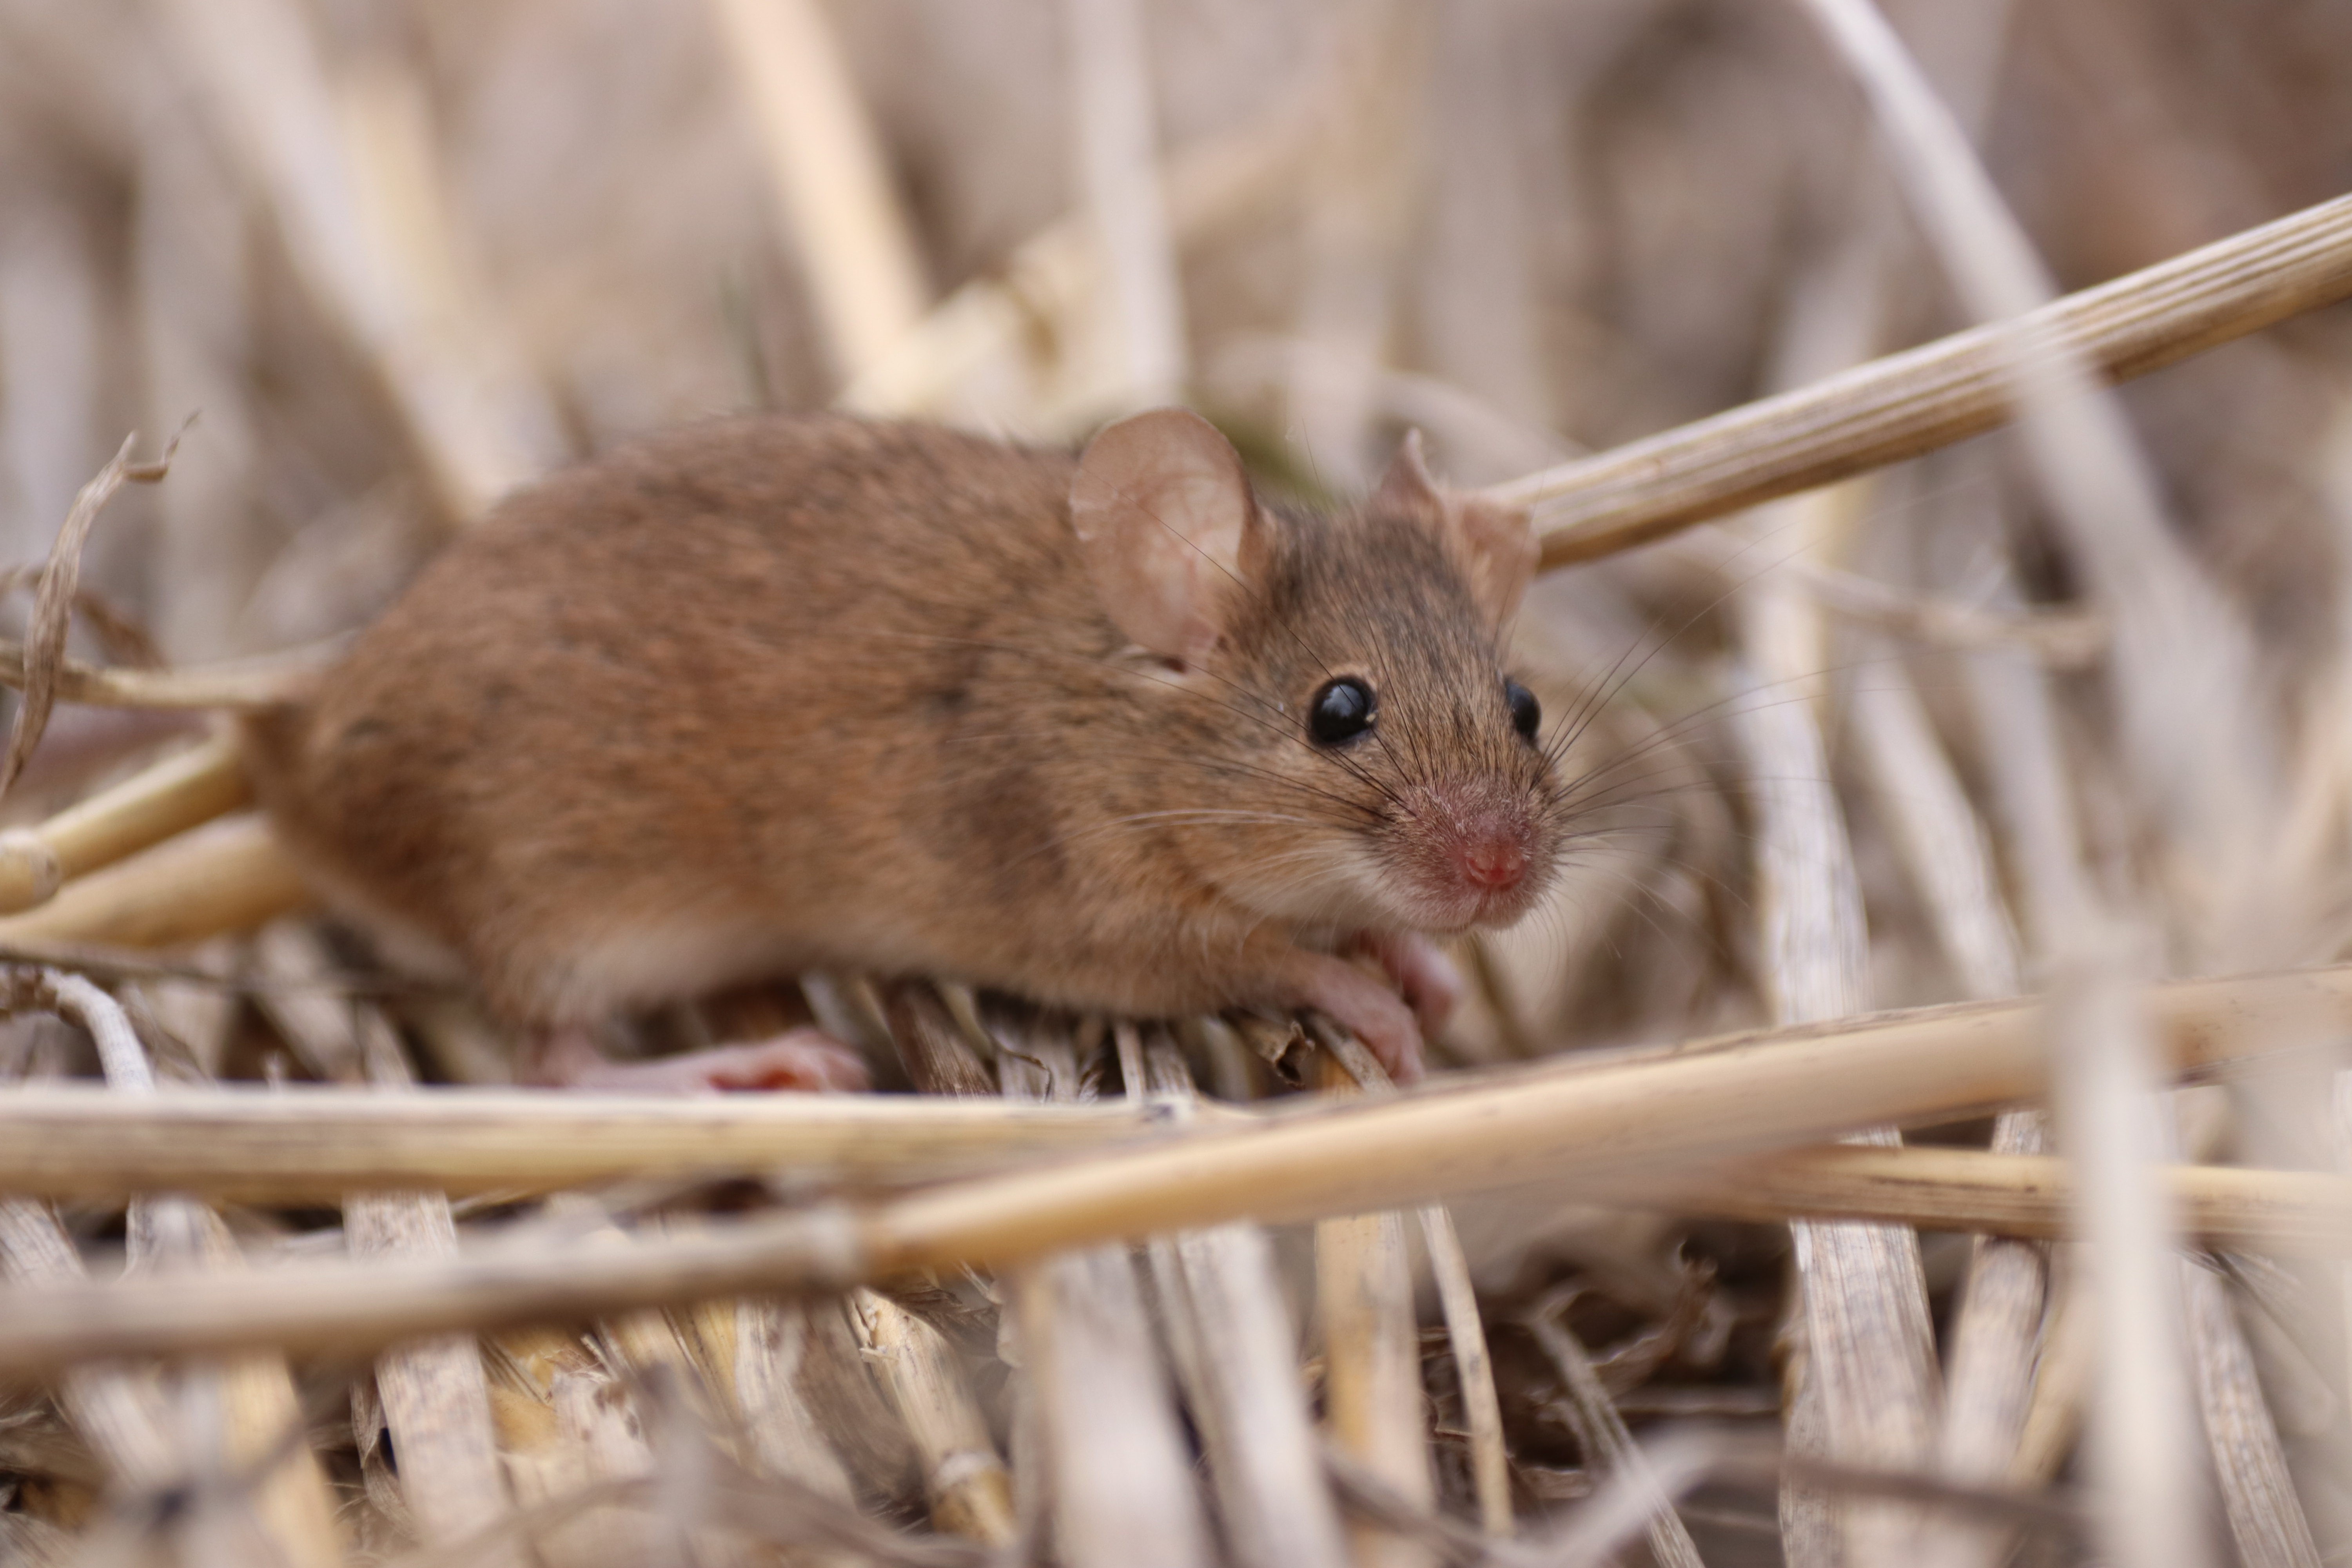 Mouse bait sales soar as farmers brace for rodent boom - ABC News